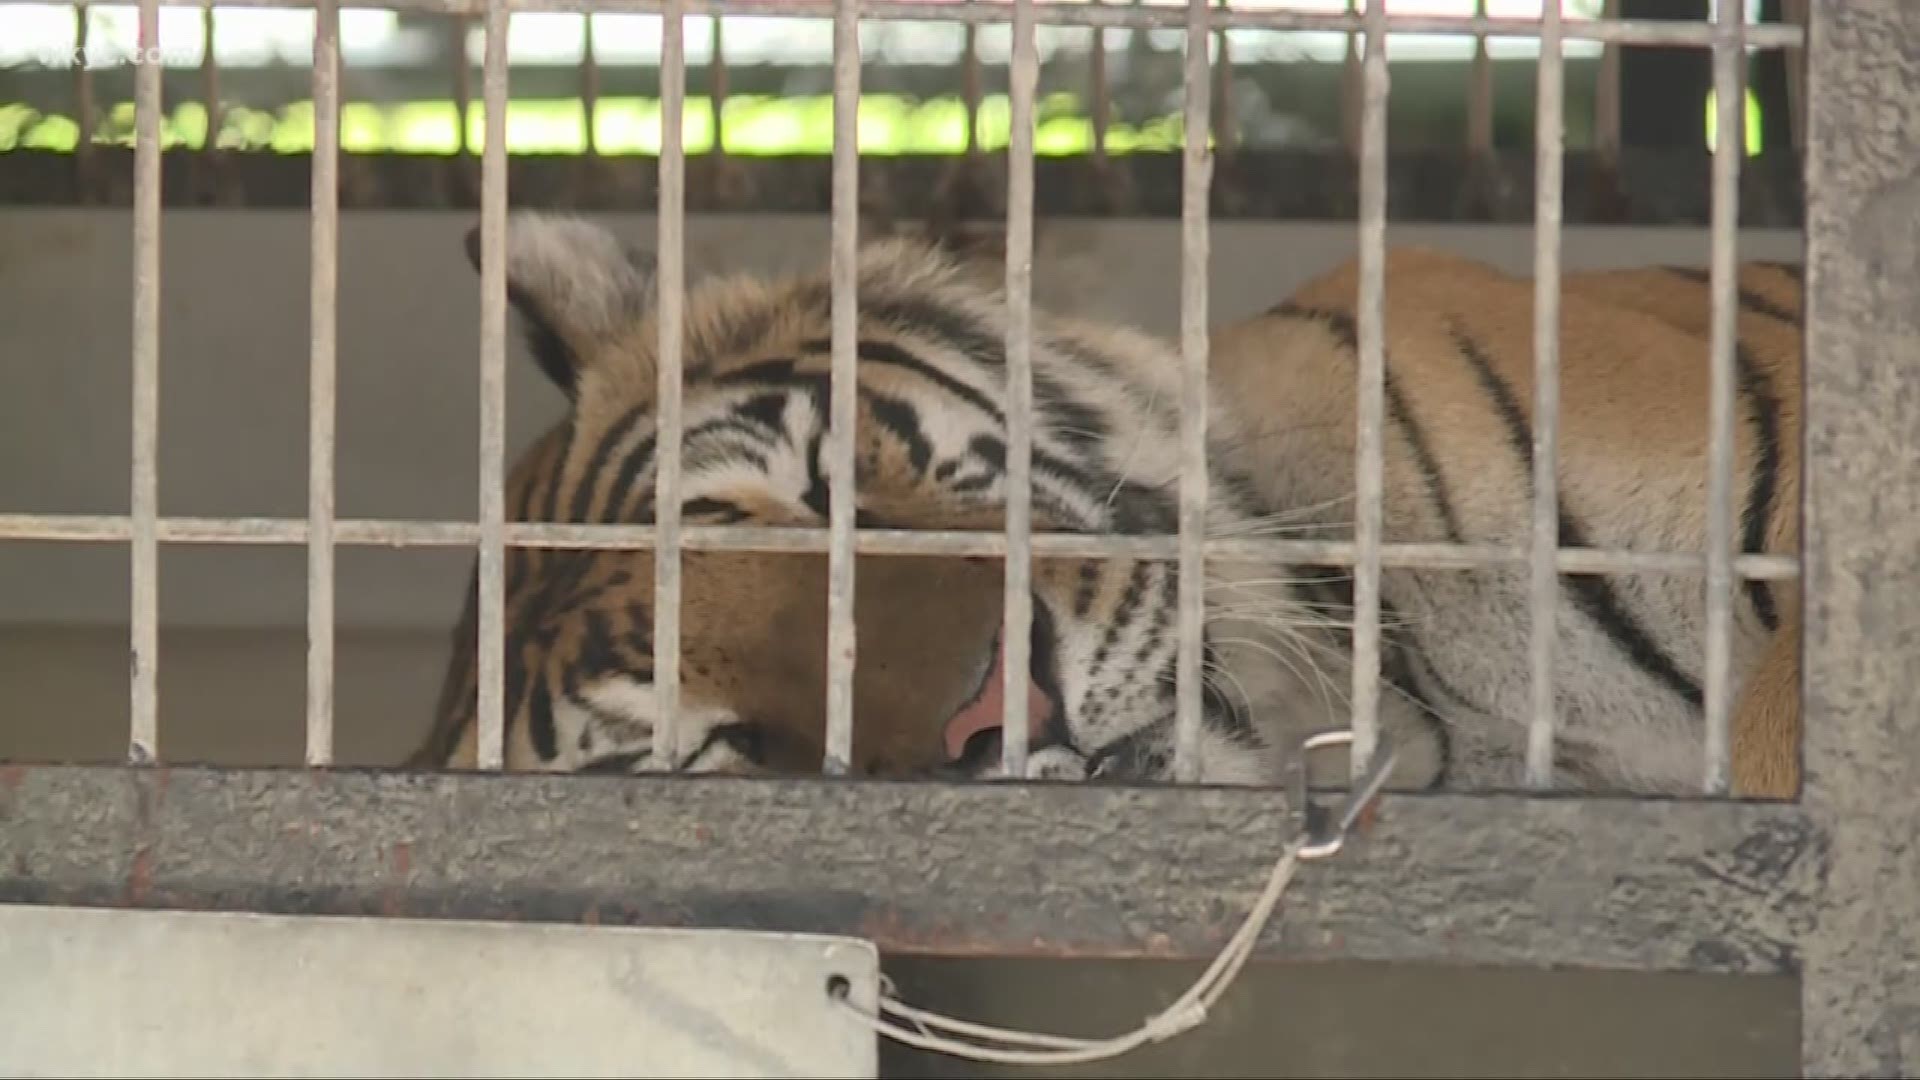 The tiger show was met with criticism when it set up at the county fair last week. Amani Abraham reports.